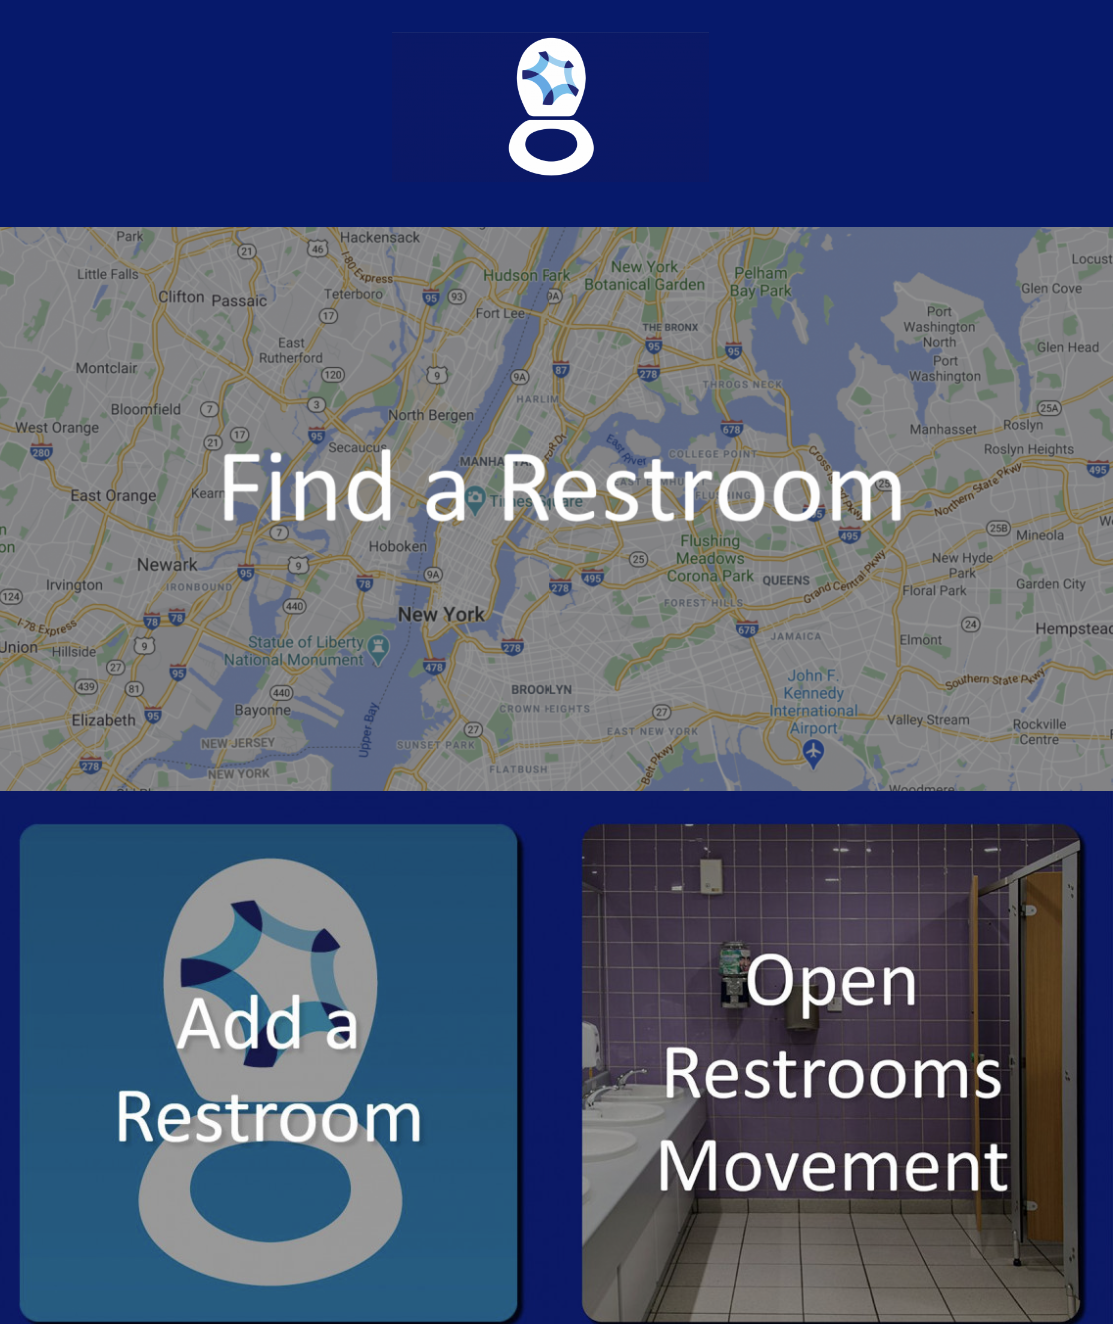 We Can't Wait - Find a Restroom app